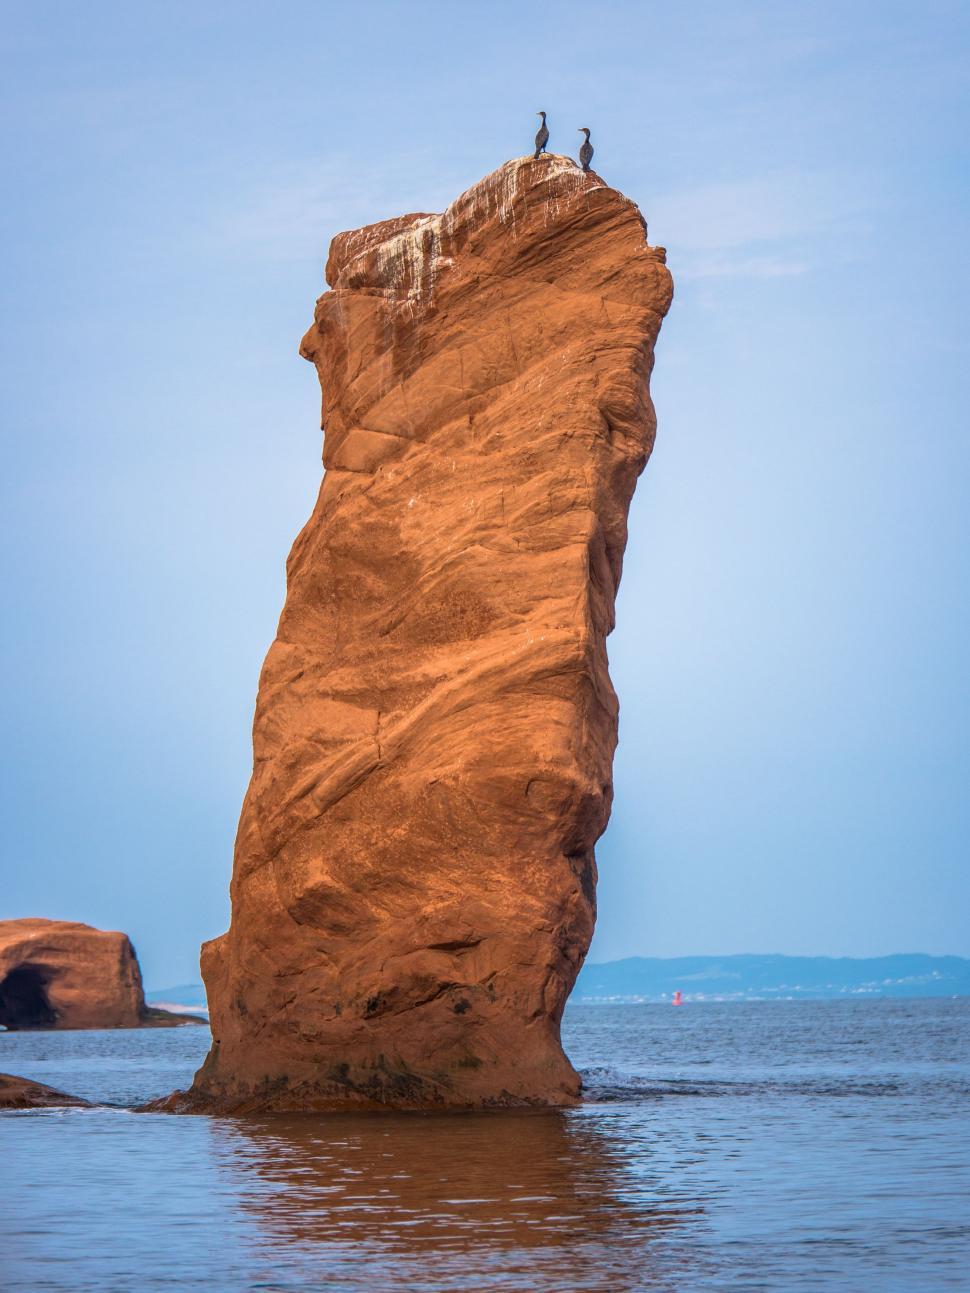 Free Image of Large Rock Jutting Out of Water 